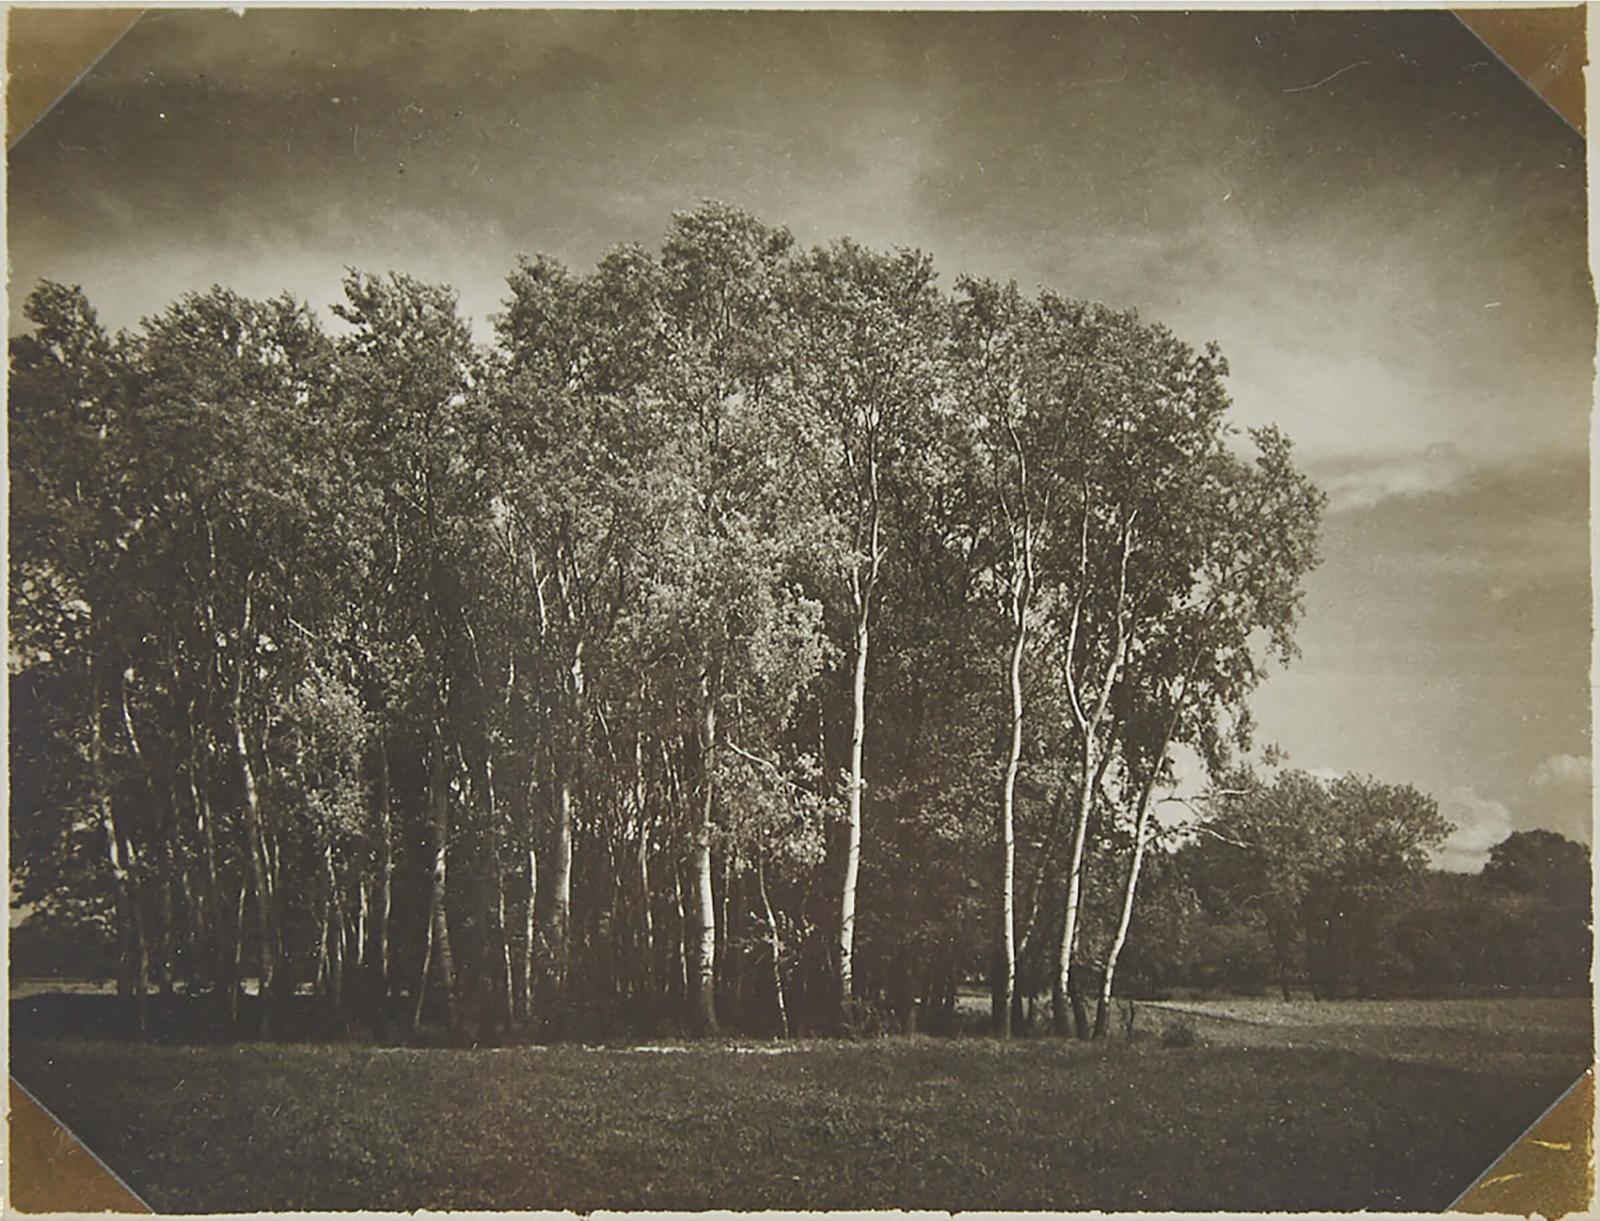 André Kertész (1894-1985) - Landscape (With Grove Of Trees In Hungary), Circa 1918